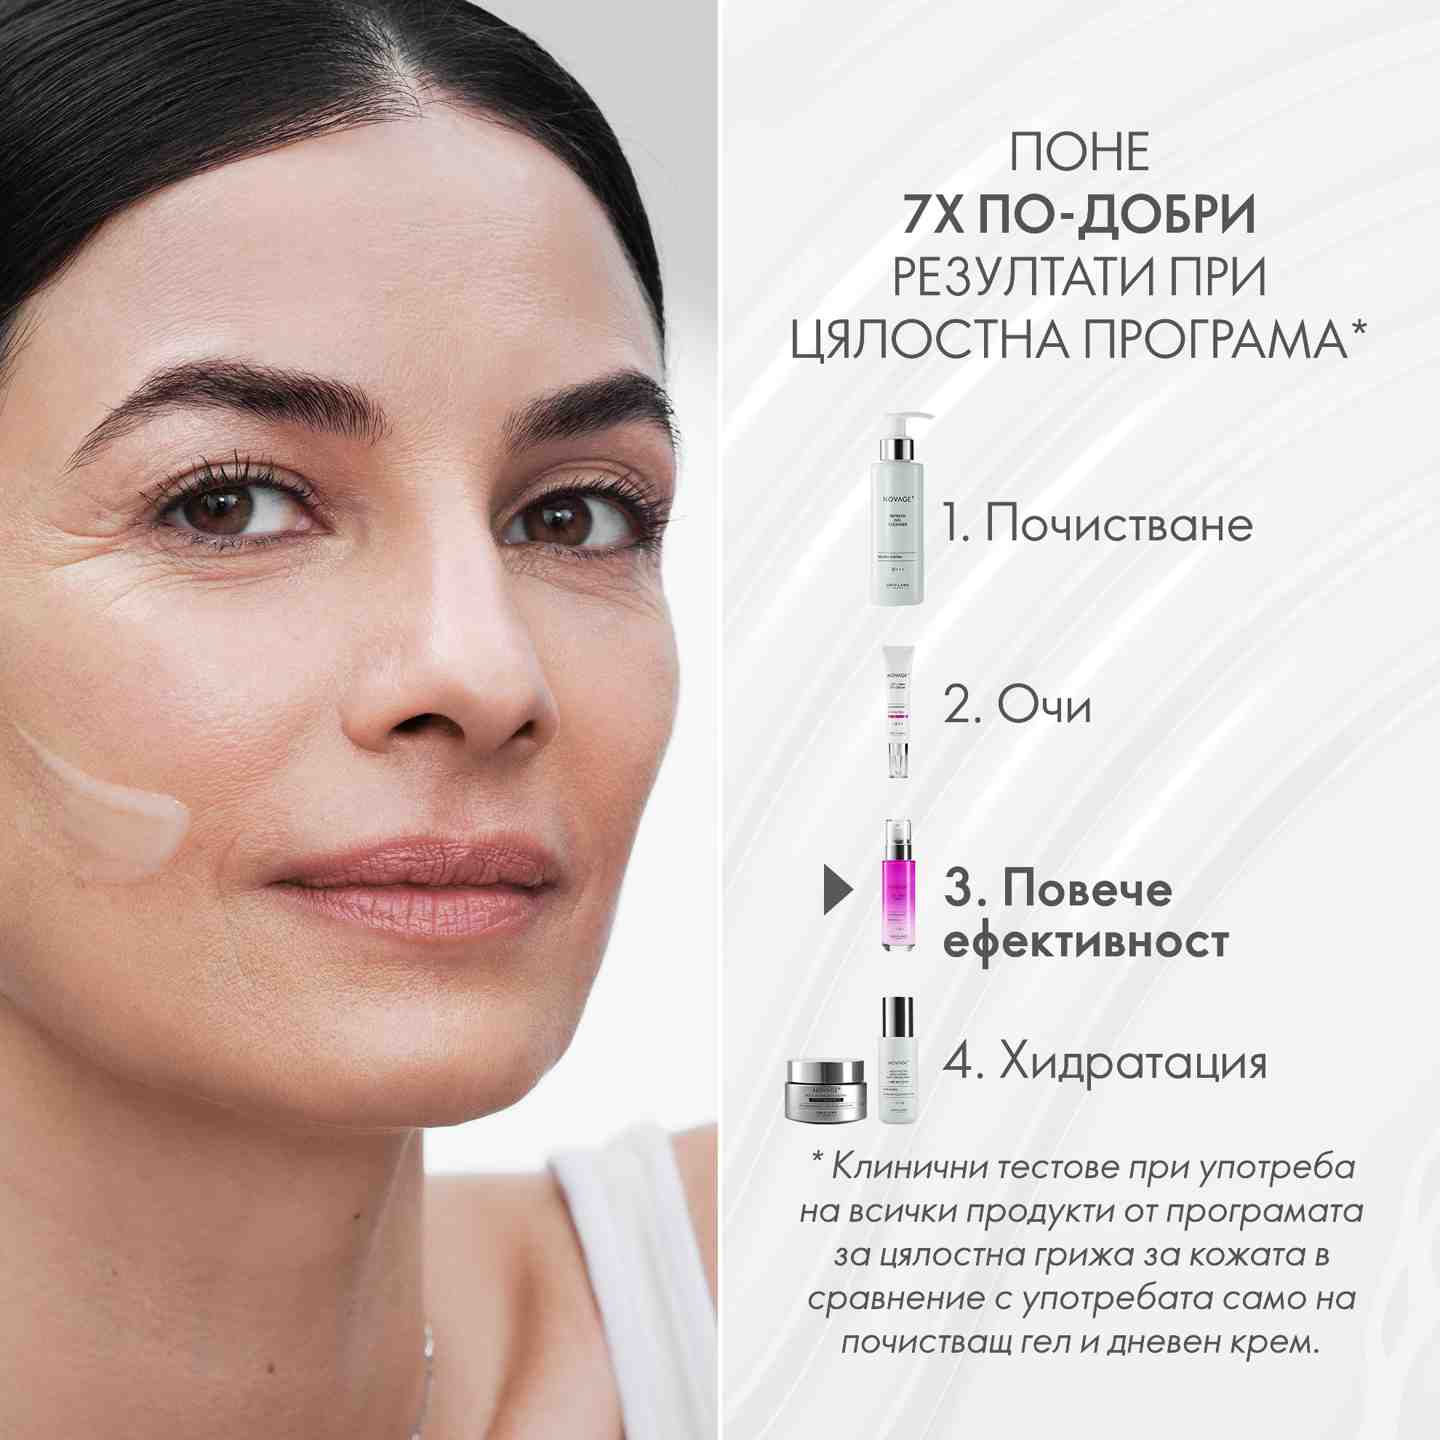 https://media-cdn.oriflame.com/productImage?externalMediaId=product-management-media%2fProducts%2f41037%2fBG%2f41037_3.png&id=17554803&version=1